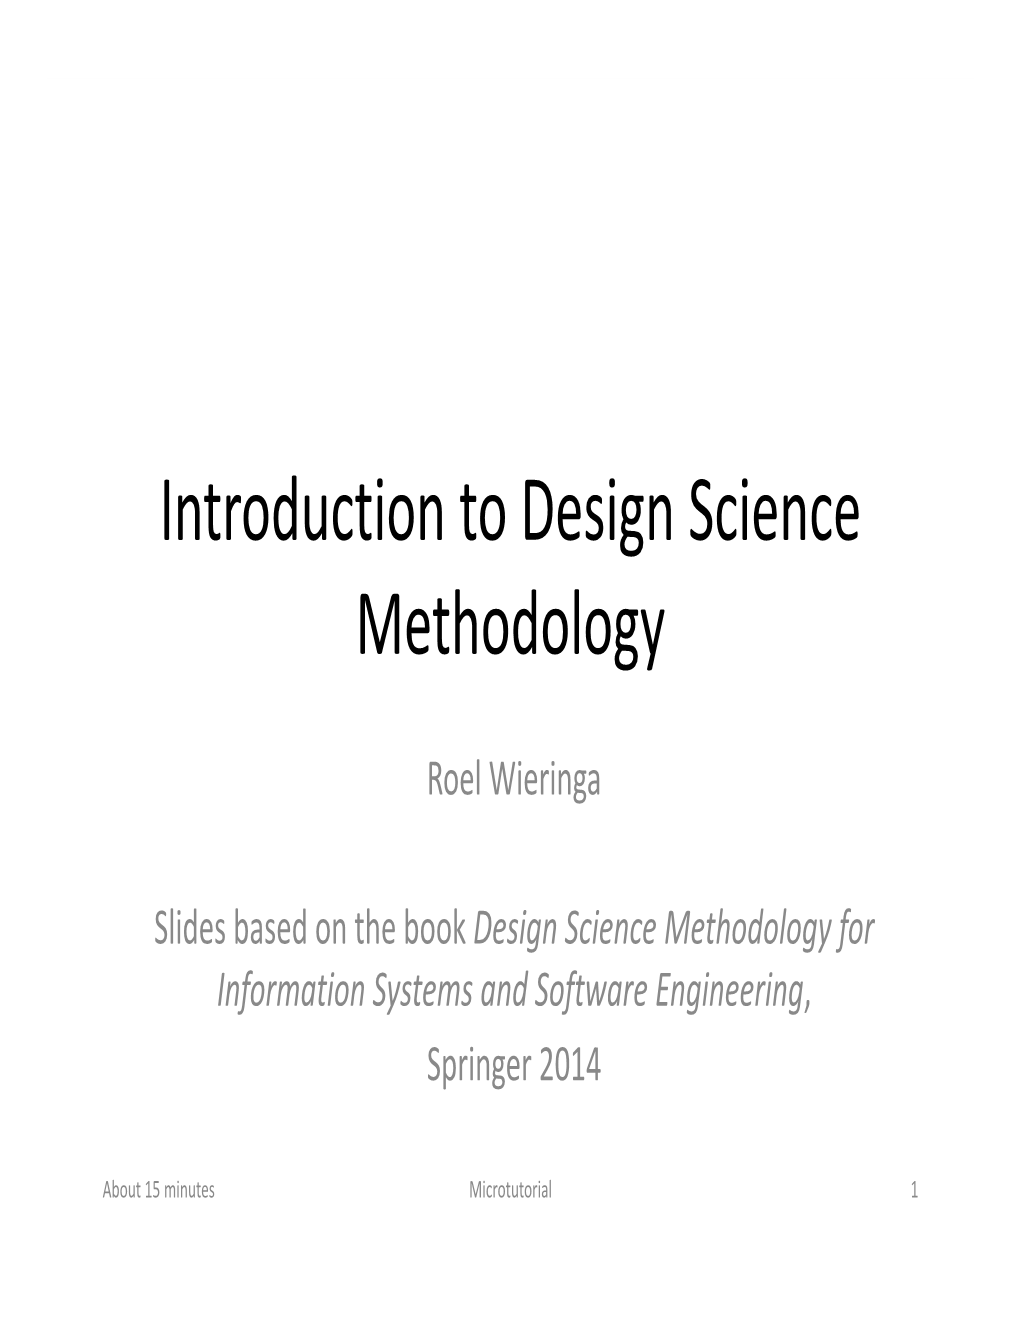 Introduction to Design Science Methodology